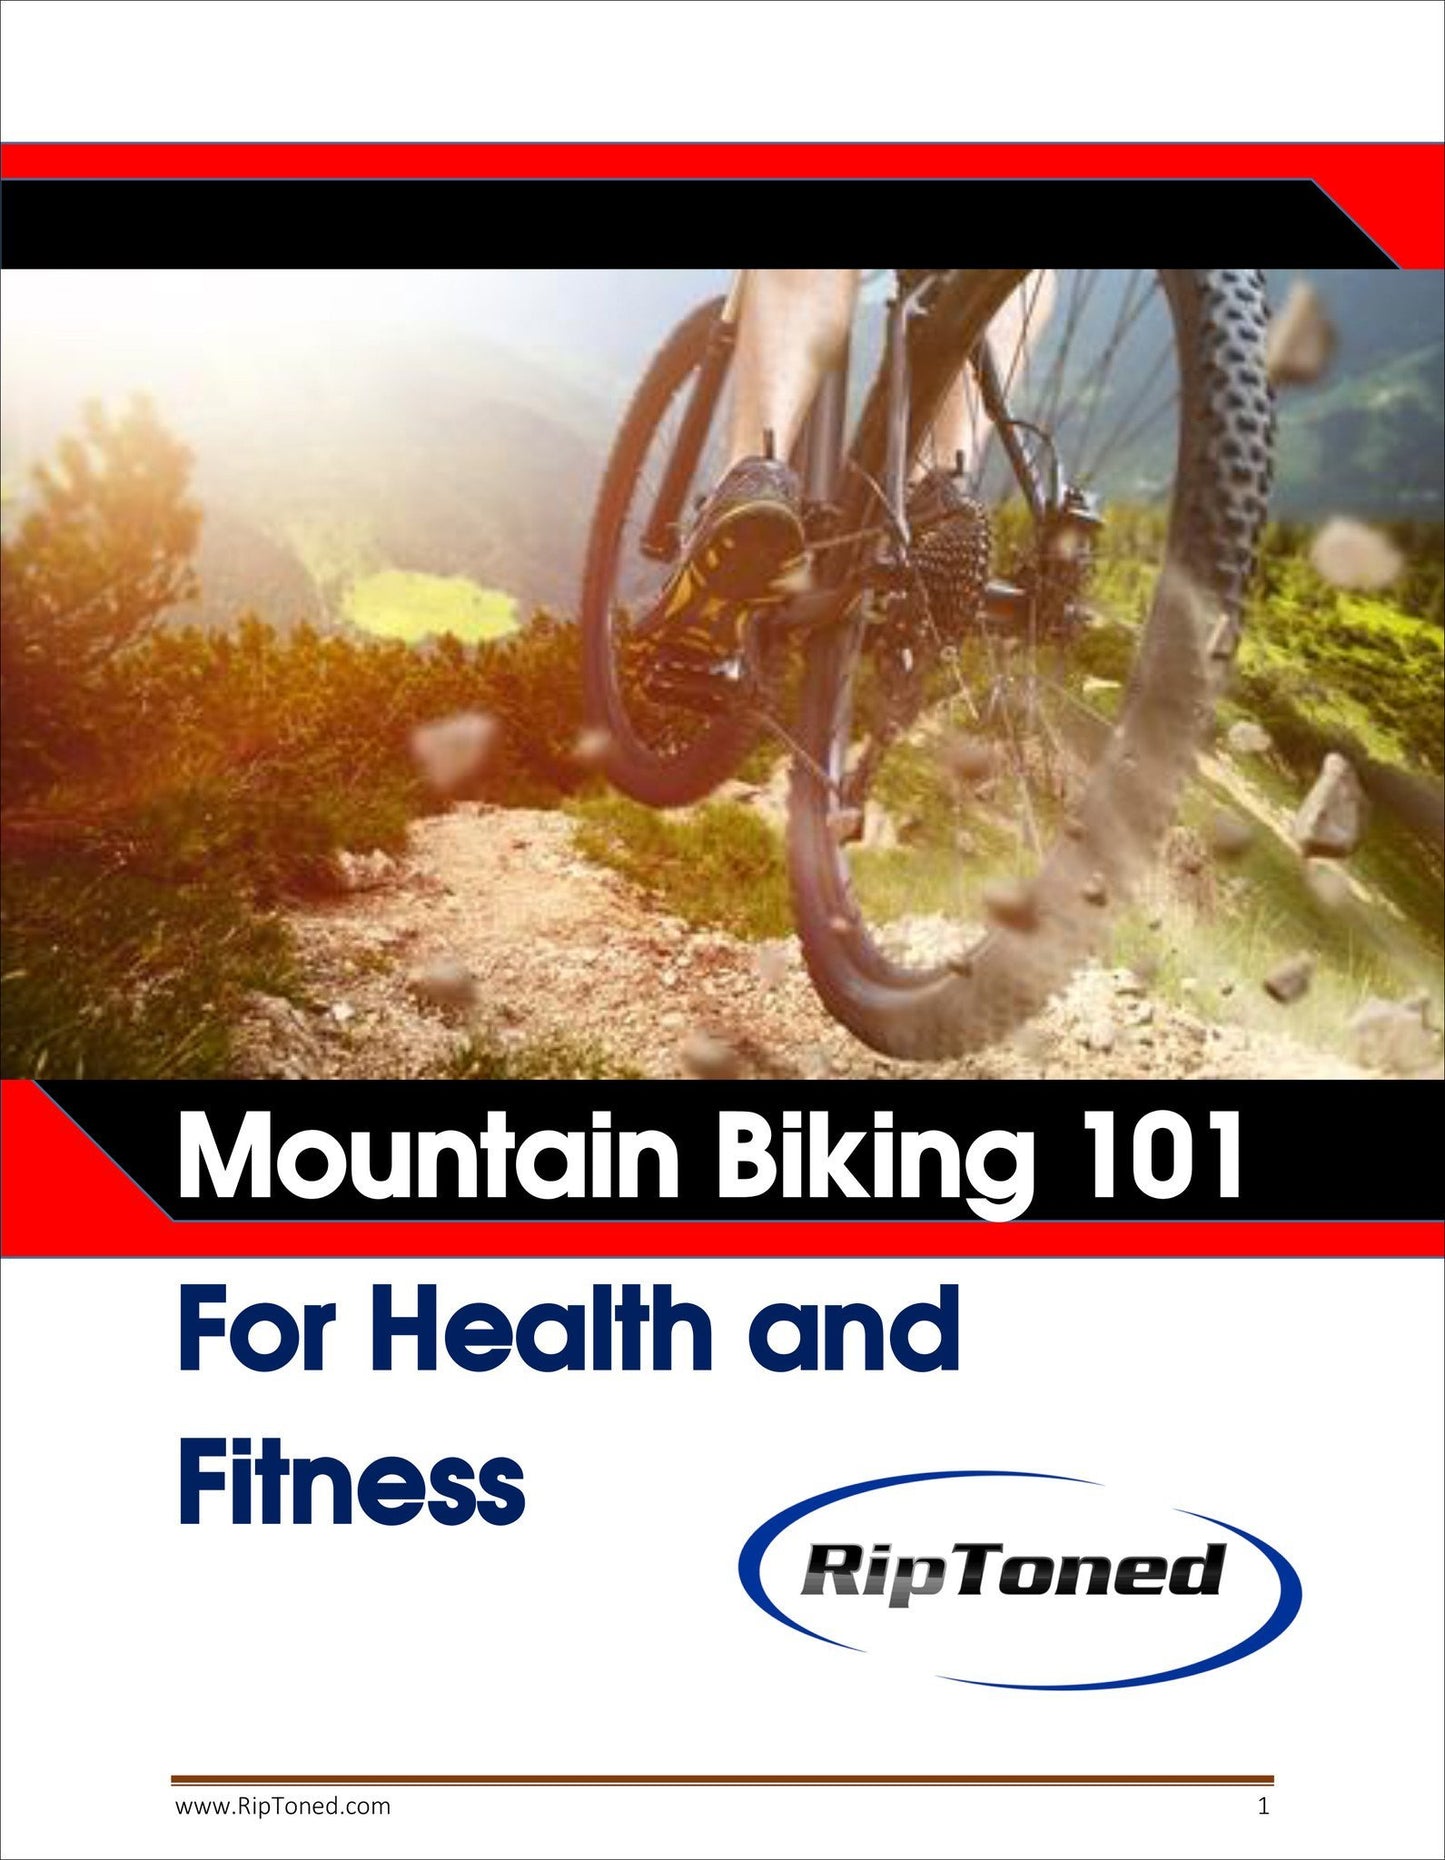 Mountain Biking 101: For Health and Fitness - Rip Toned